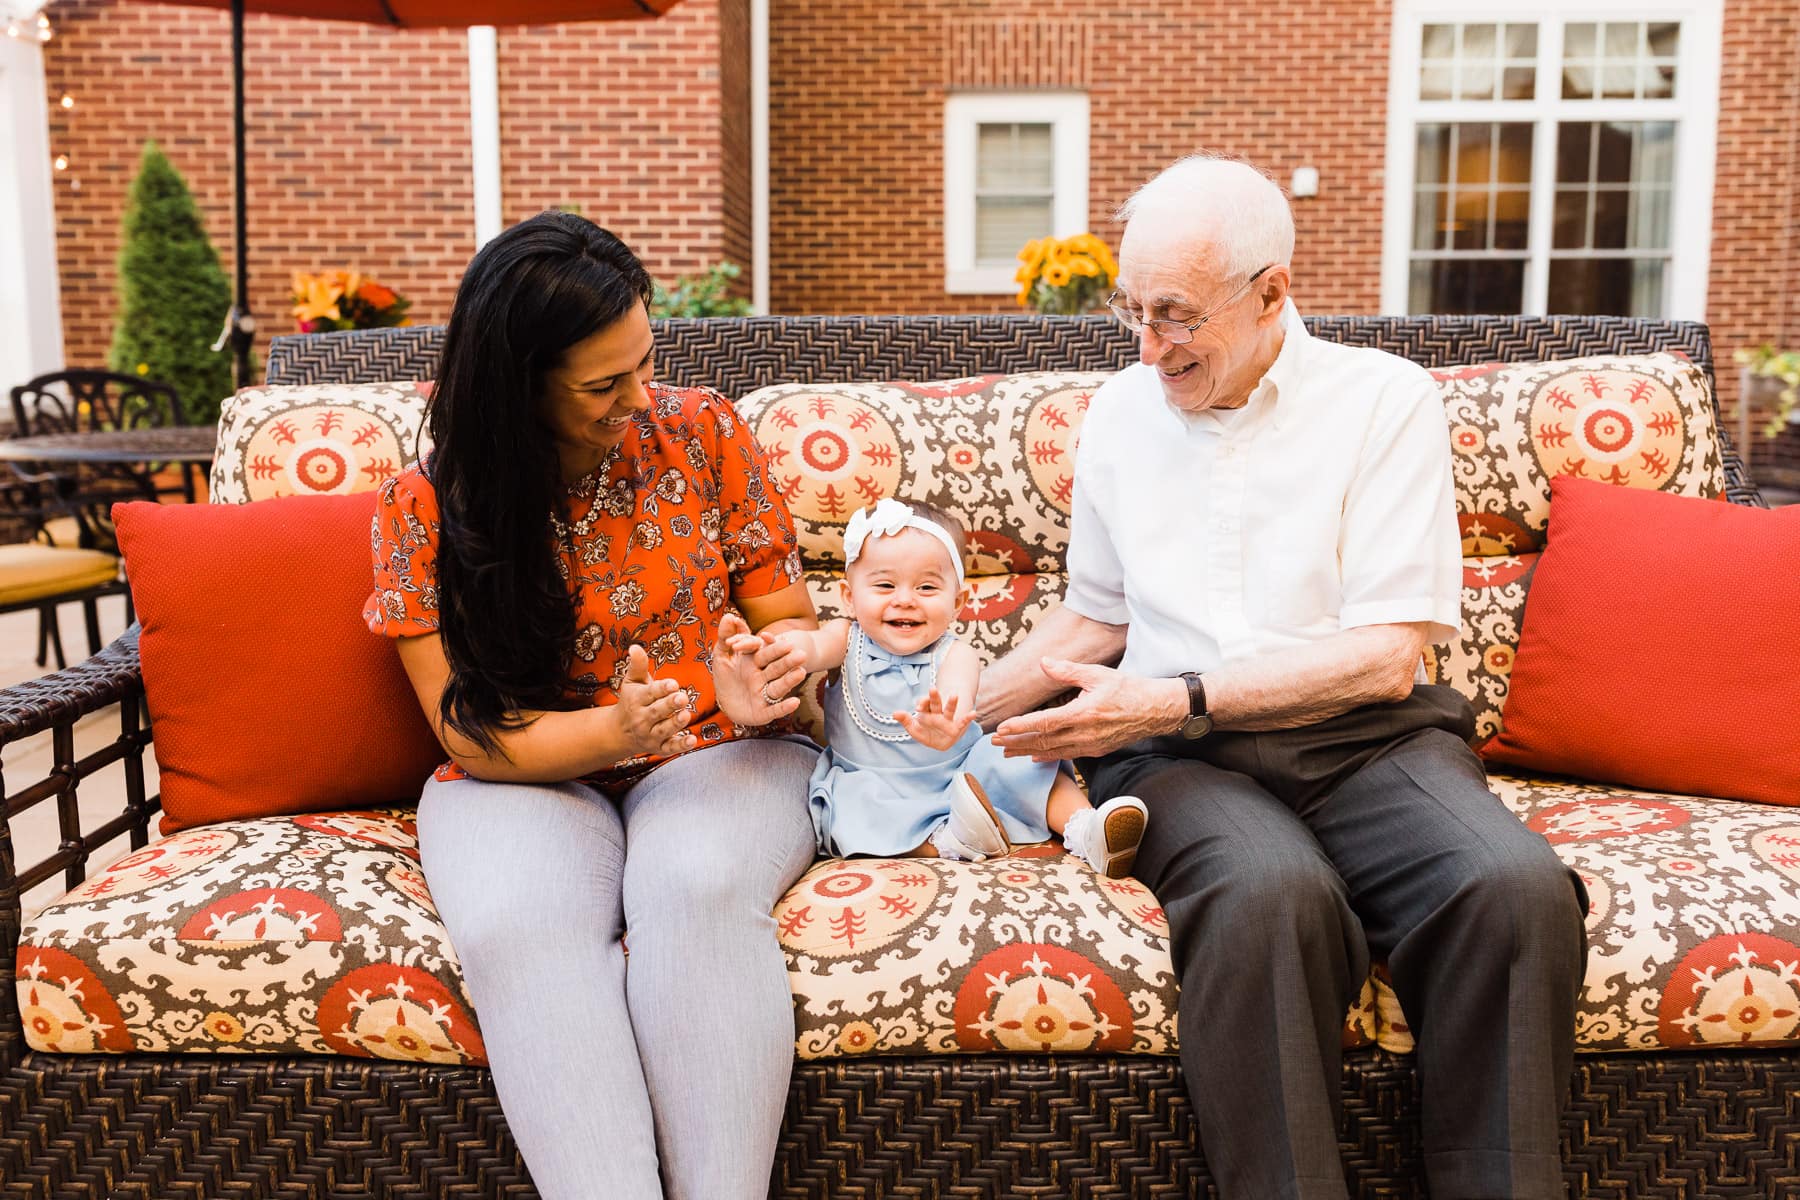 mother of infant, infant, and elderly man sitting on bench